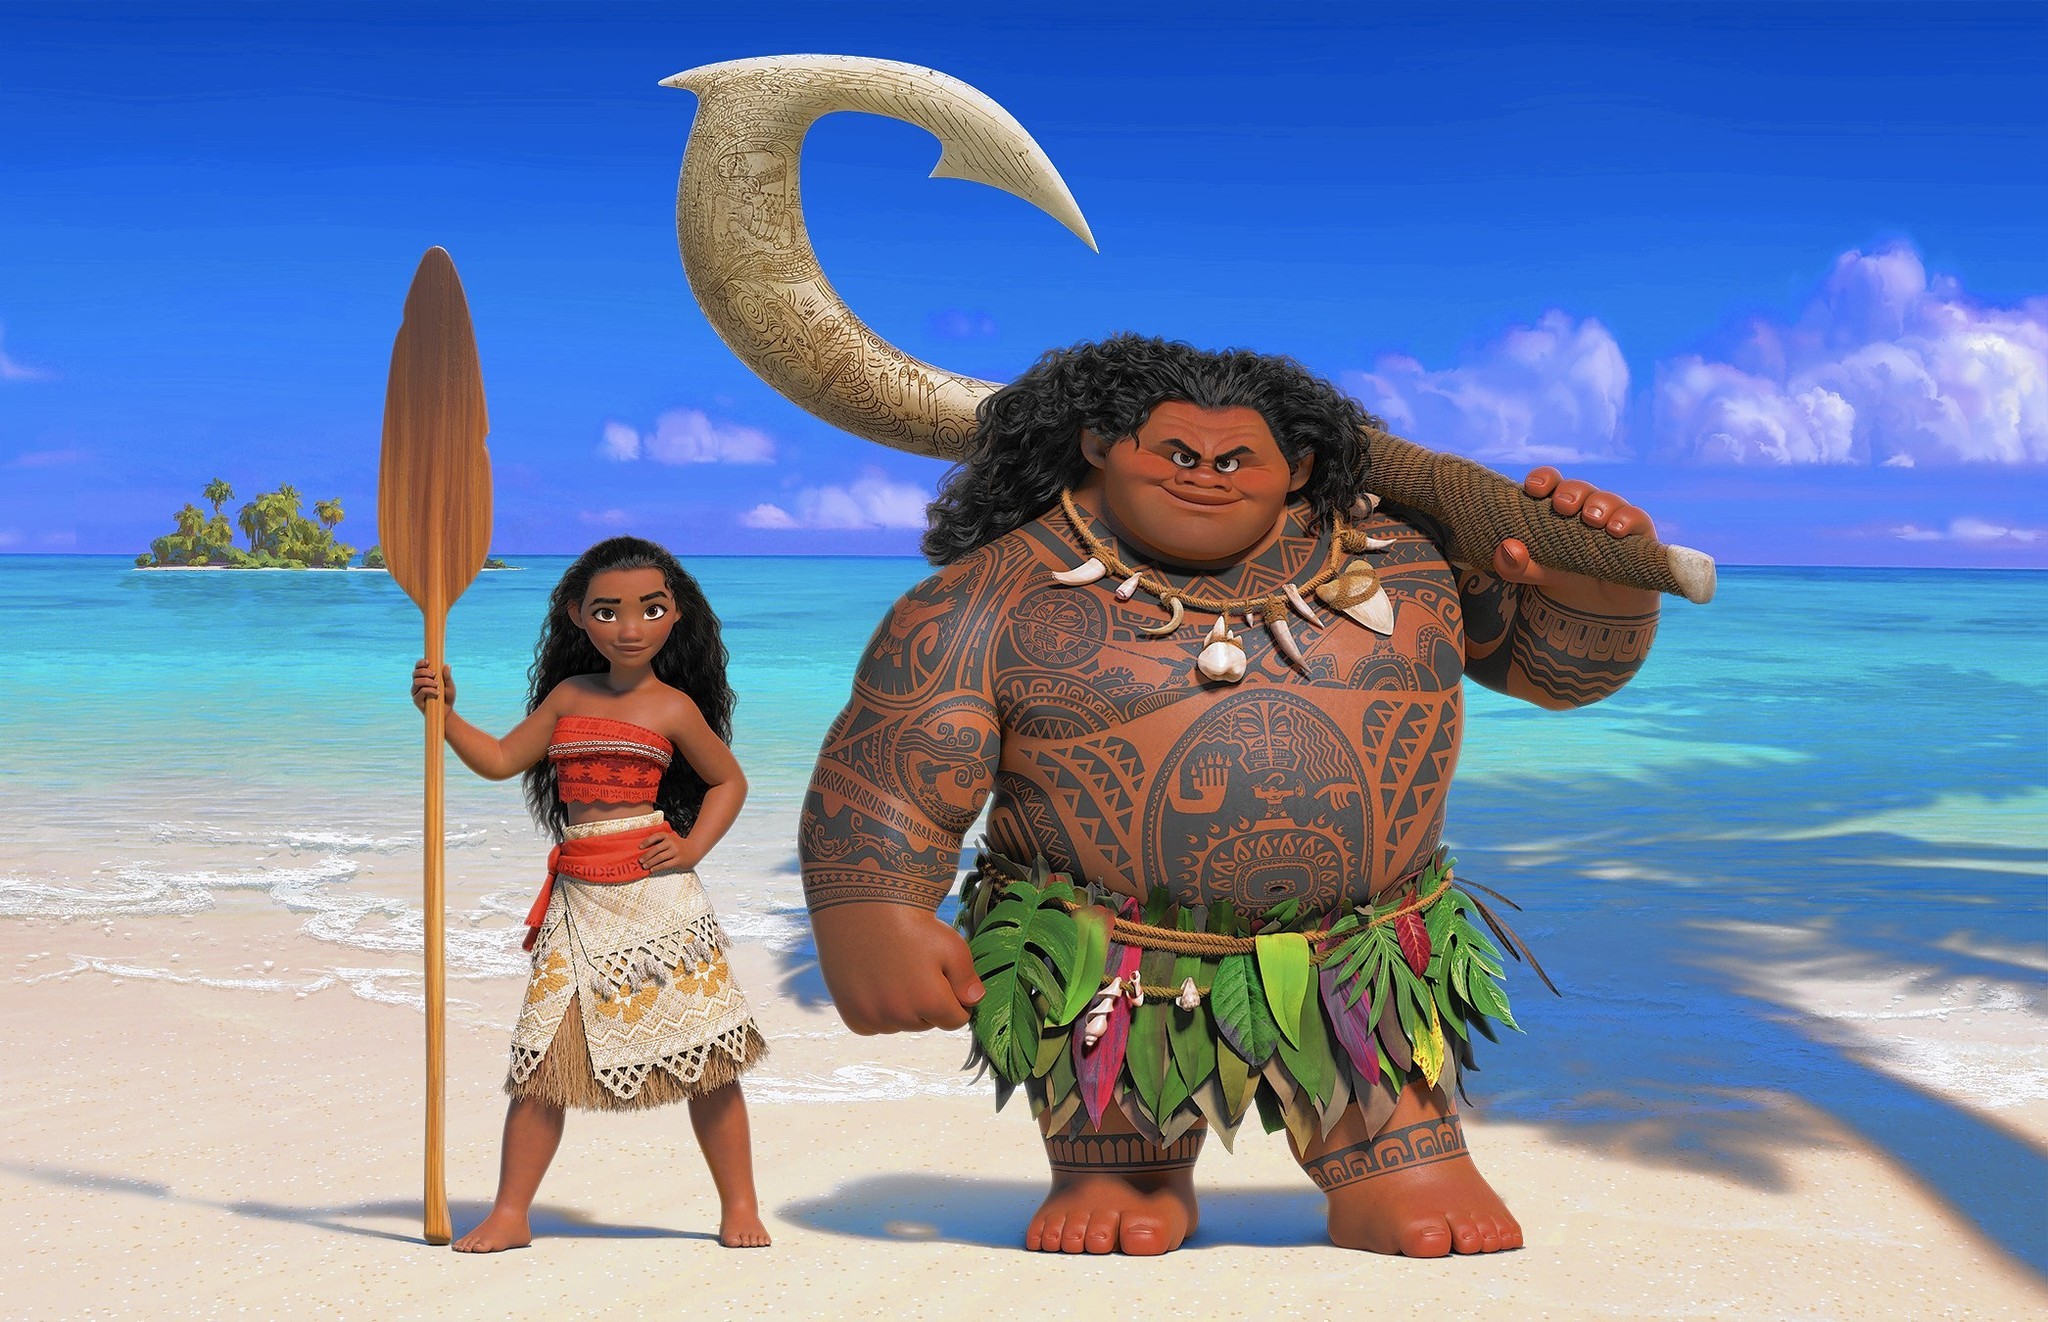 Explaining that lousy Maui costume — and cultural appropriation — to a kid ...